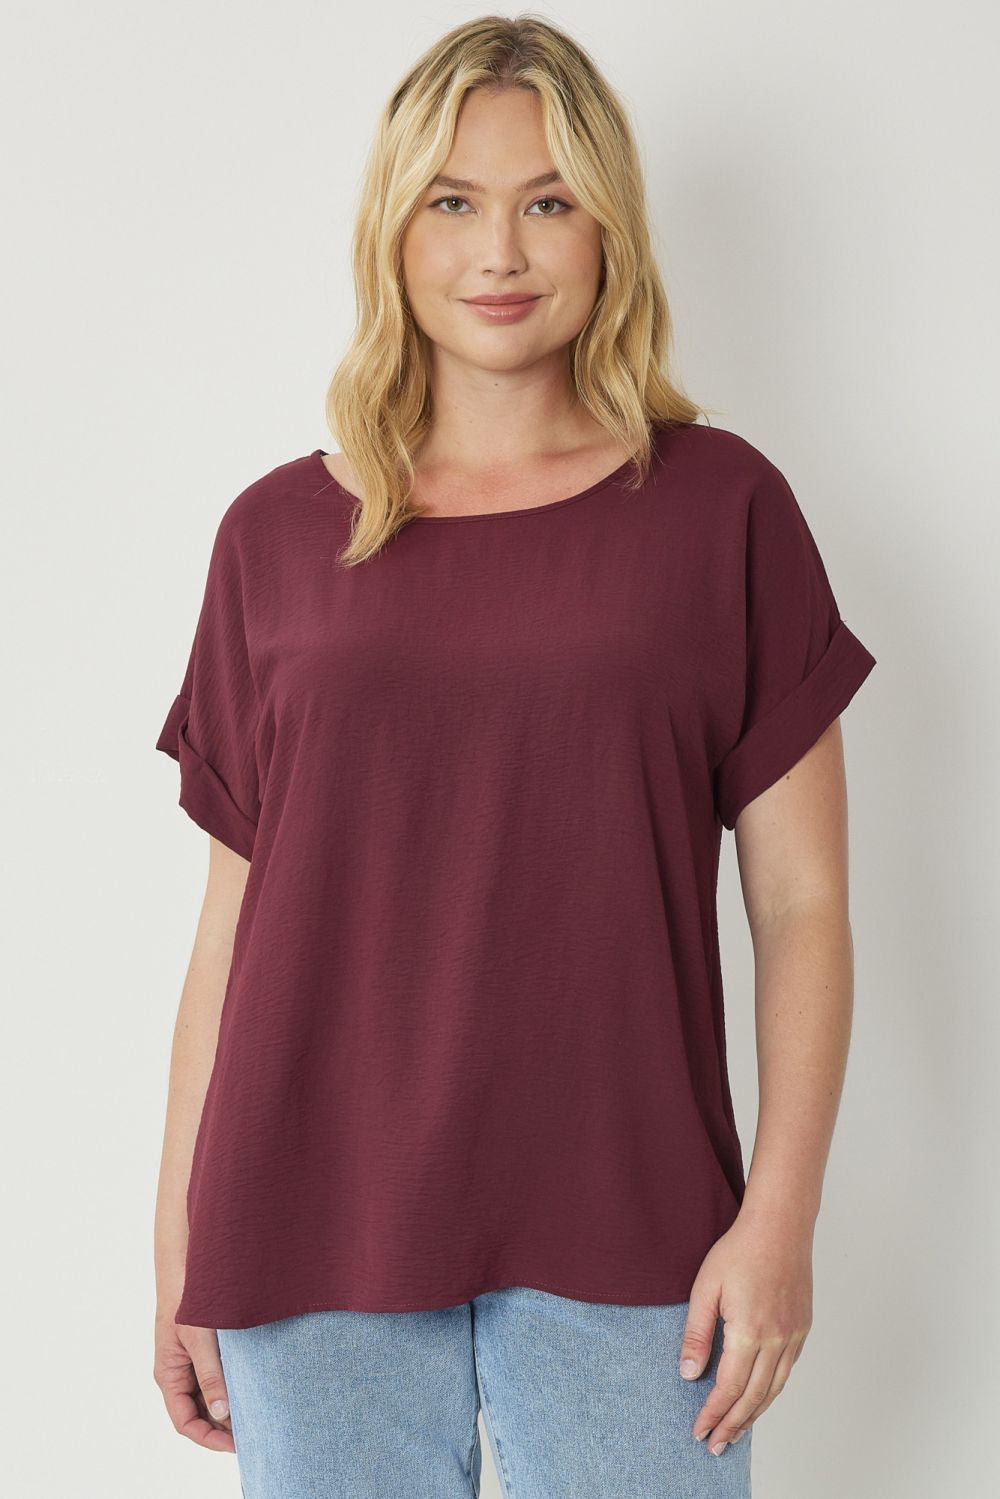 Burgundy scoop-neck top featuring permanent rolled sleeve detail and an asymmetrical hem.